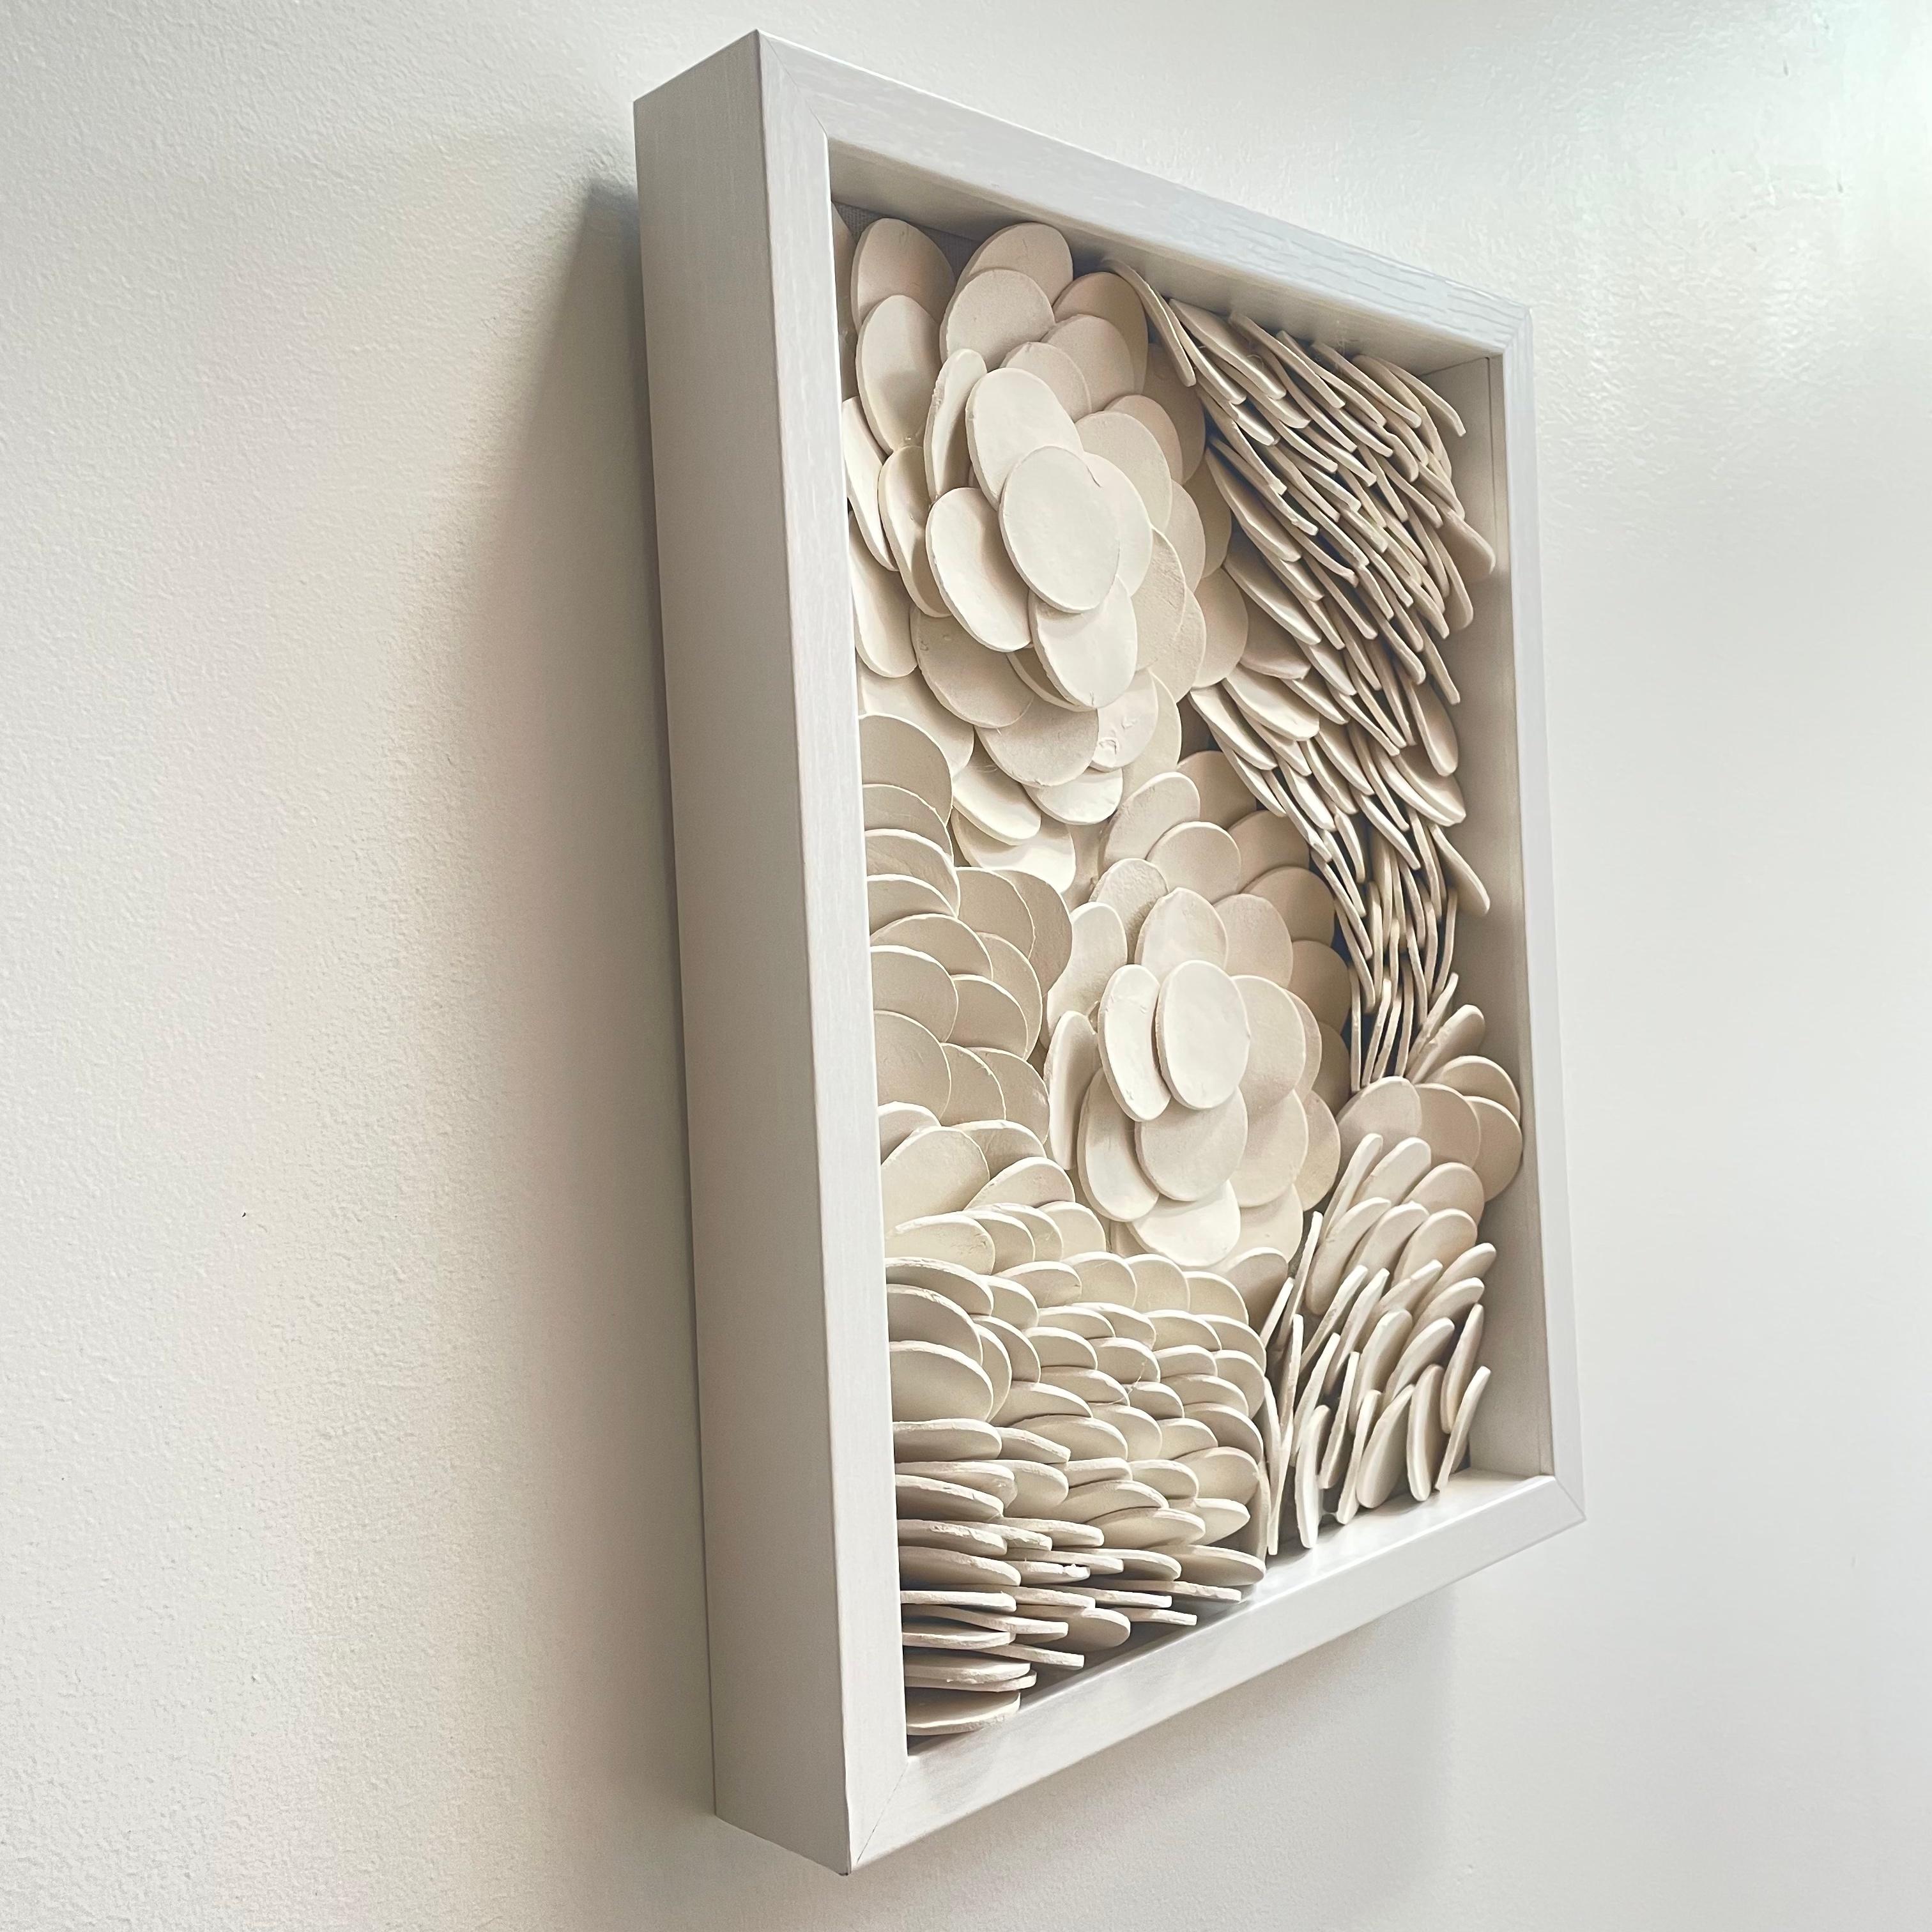 Lapis 270  - white 3D abstract floral geometric ceramic wall composition - Contemporary Mixed Media Art by Marie Laforey